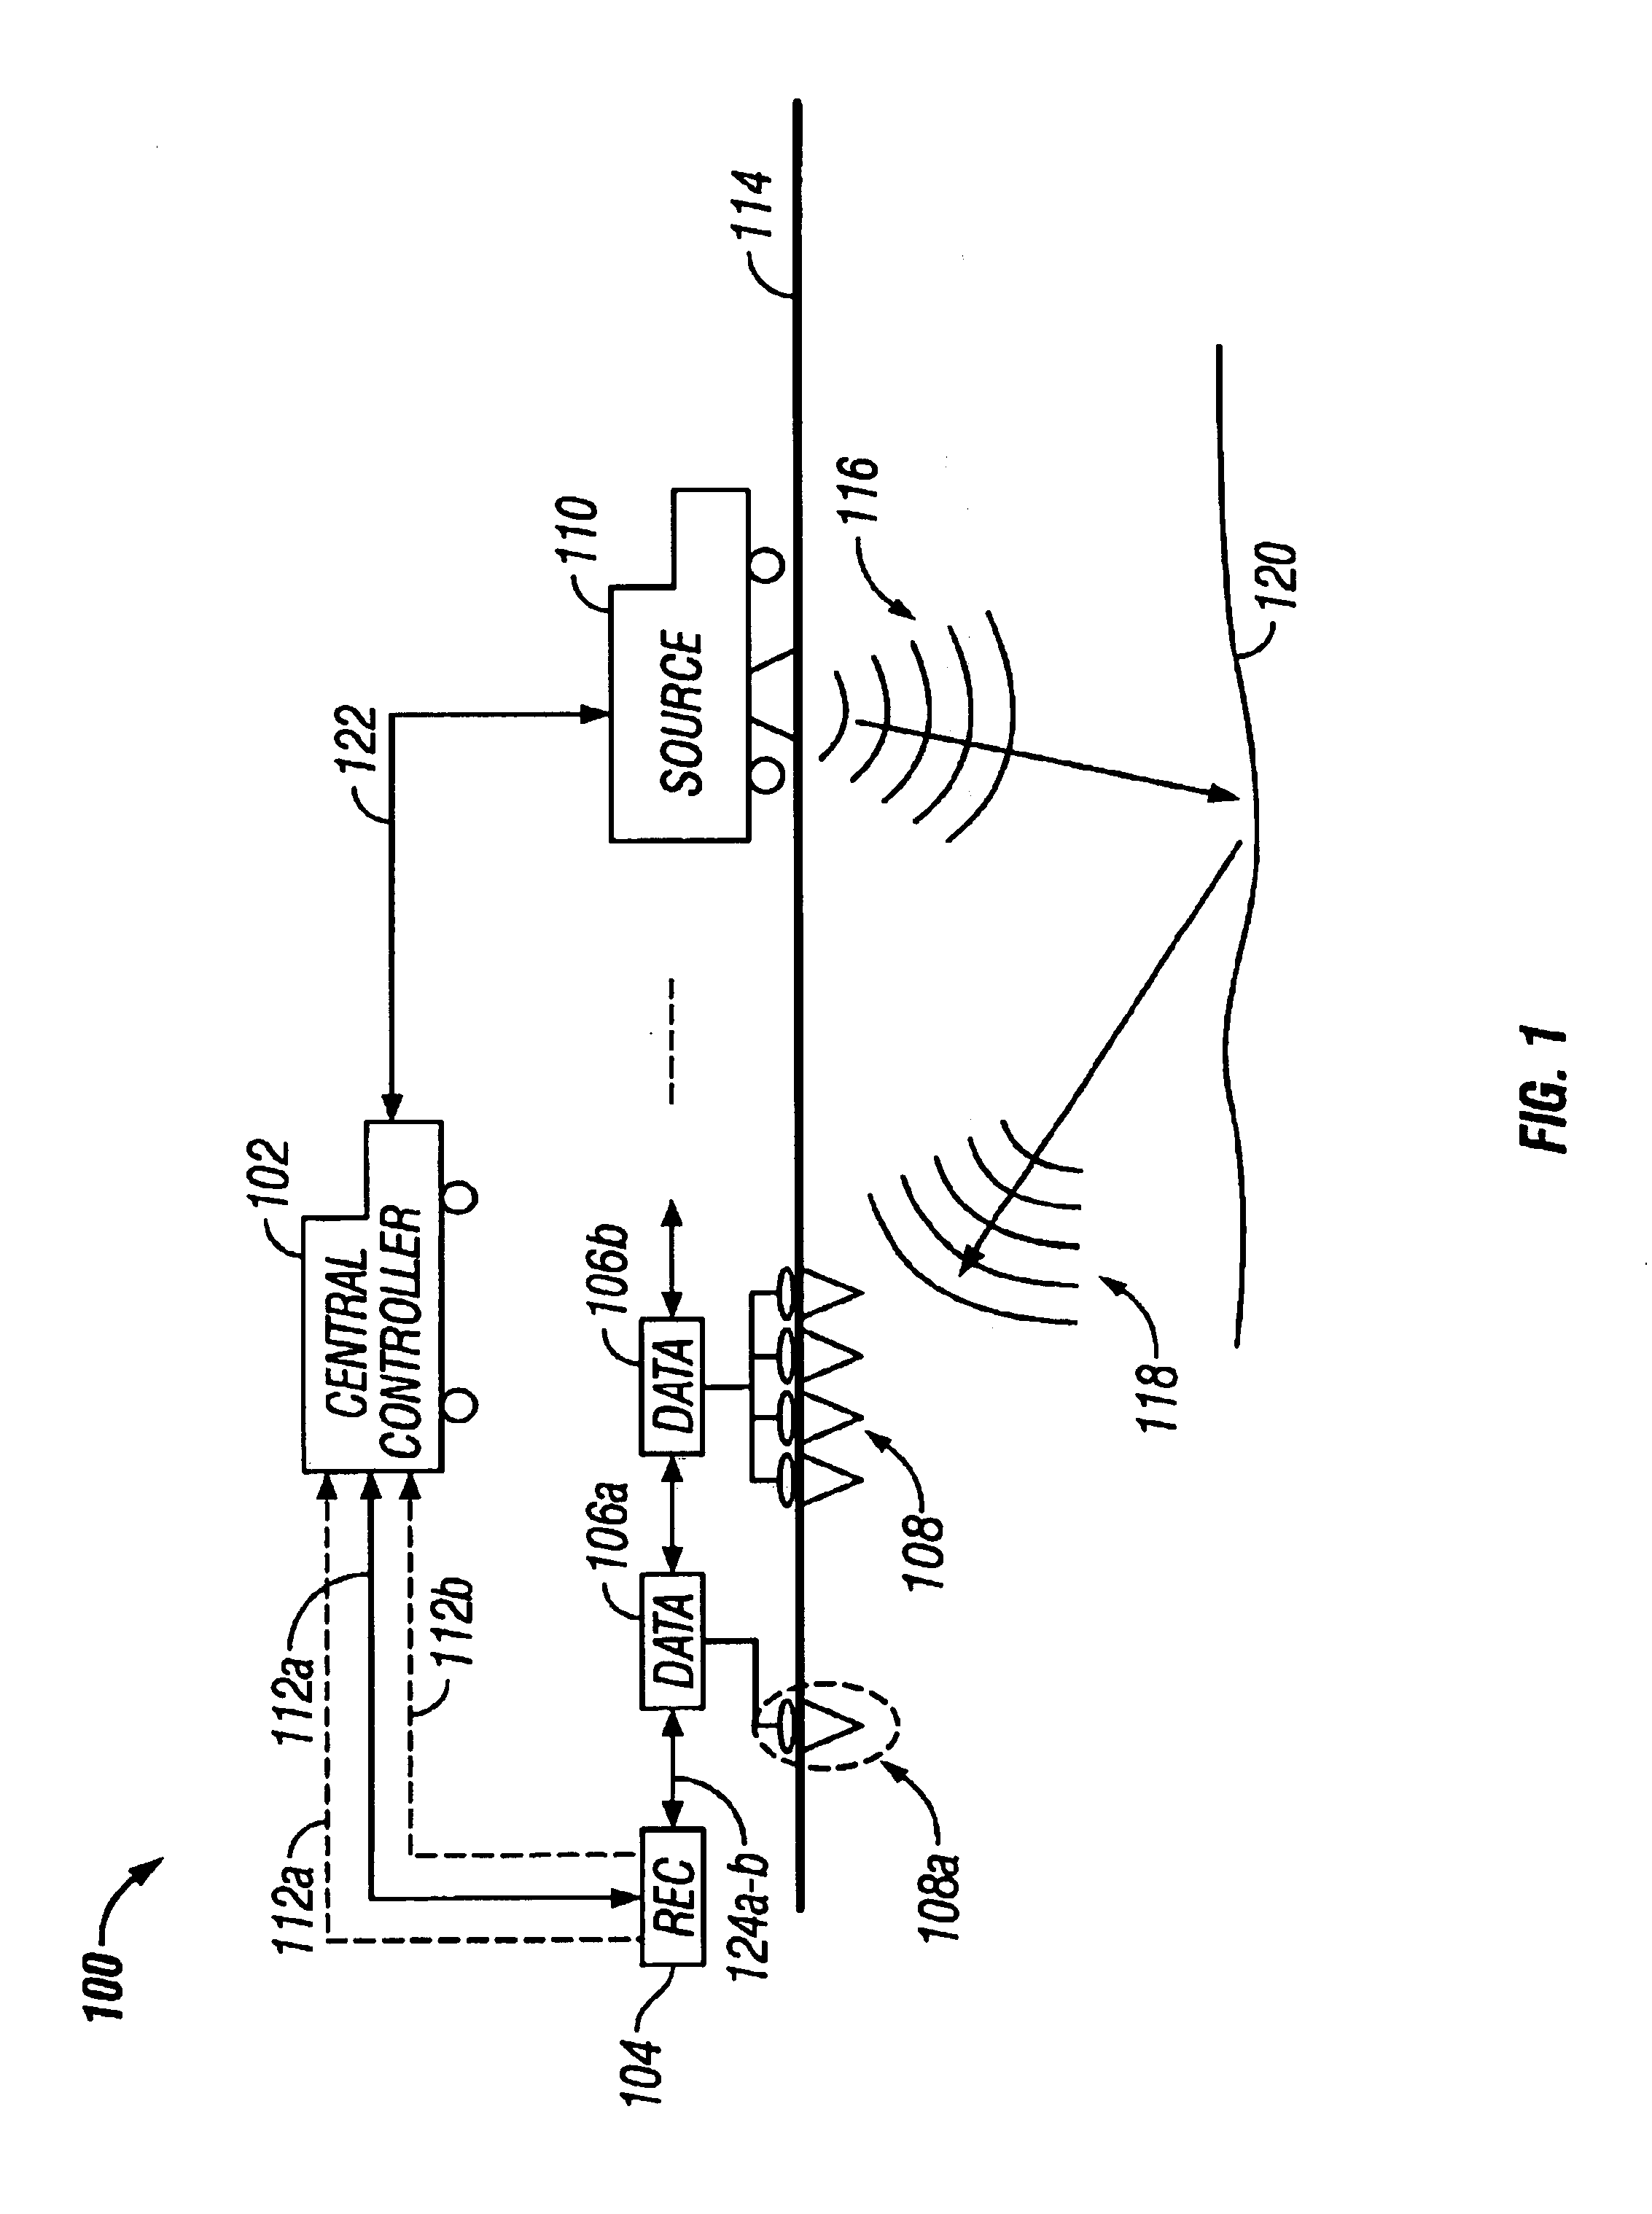 Adaptive filtering apparatus and method for seismic data acquisition